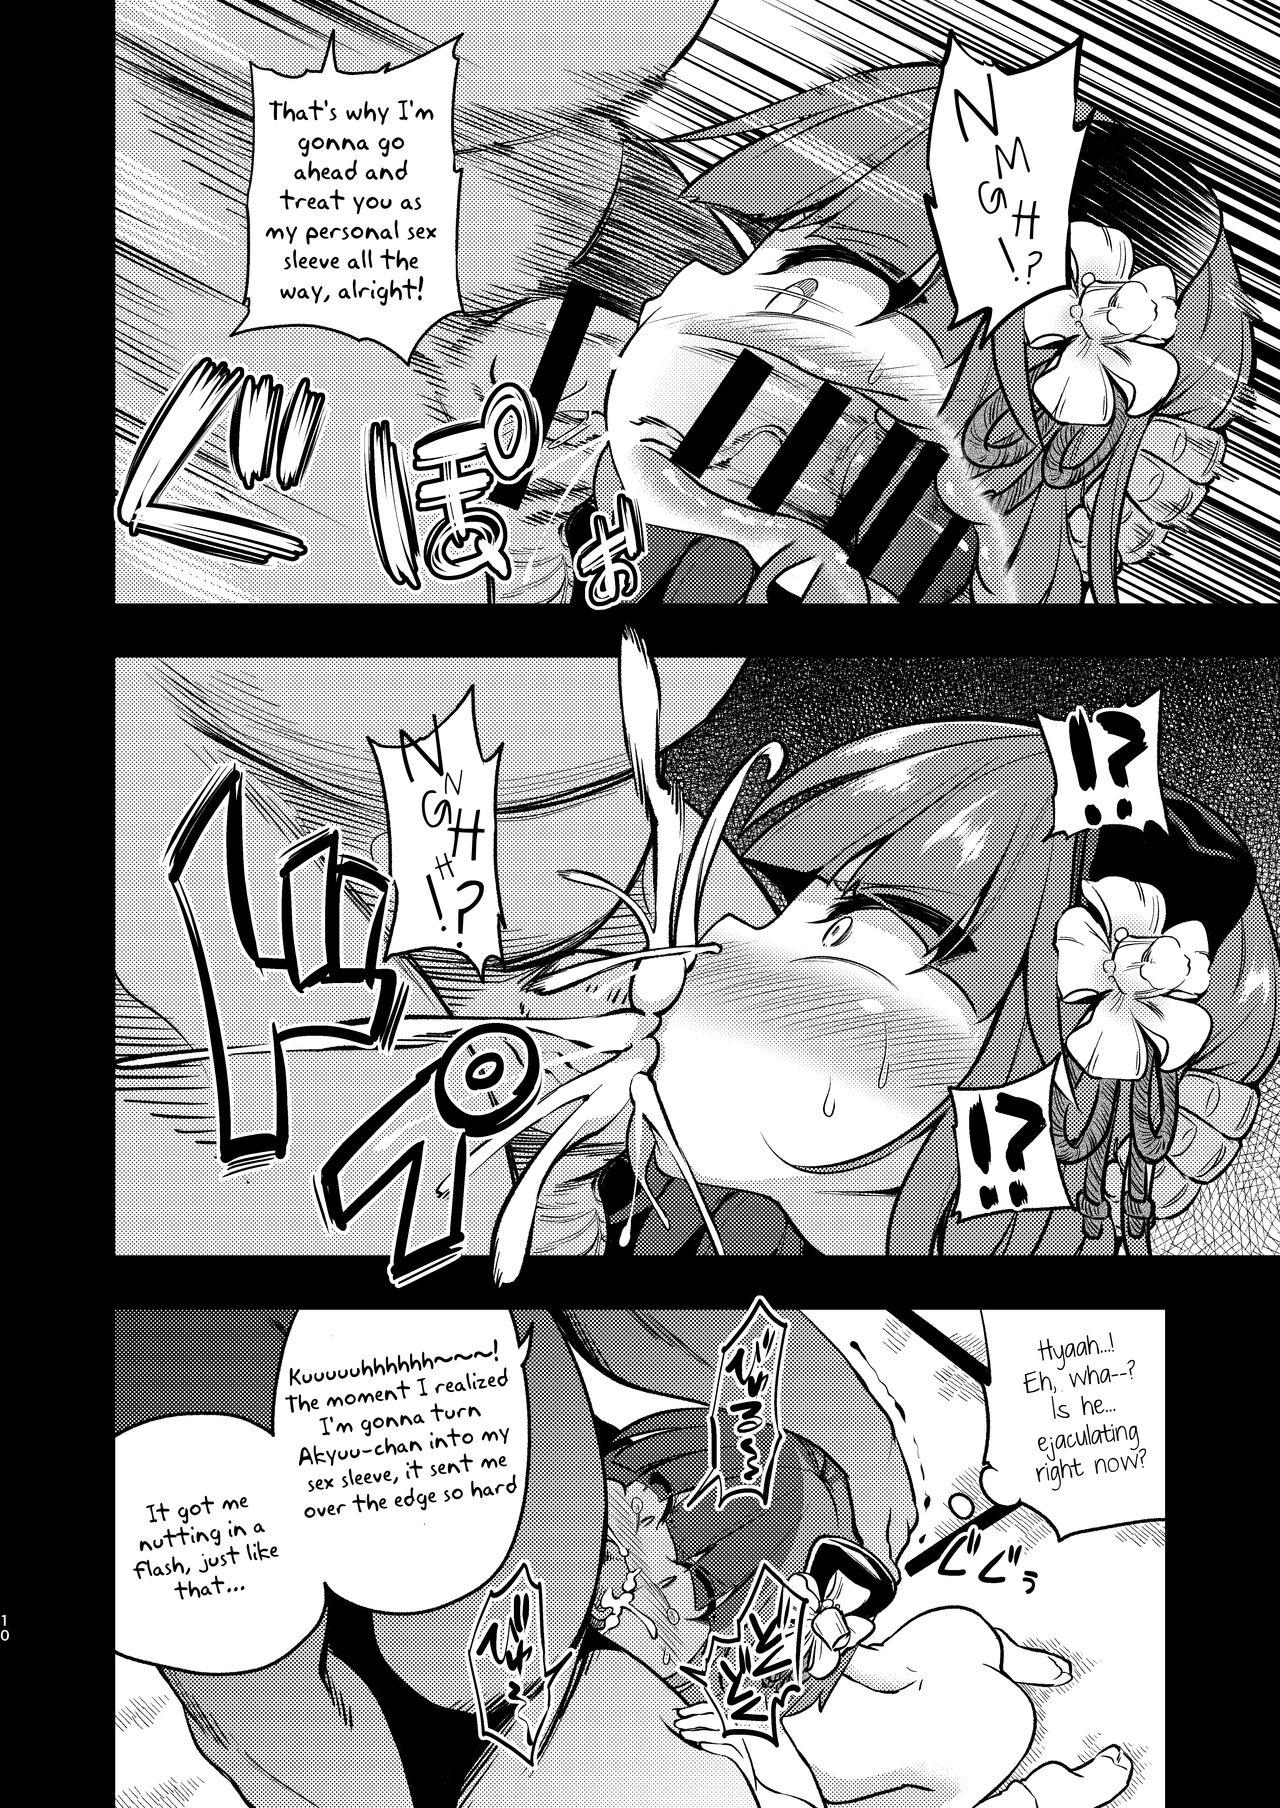 Spreading Suzuakan 2 - Touhou project Wam - Page 9